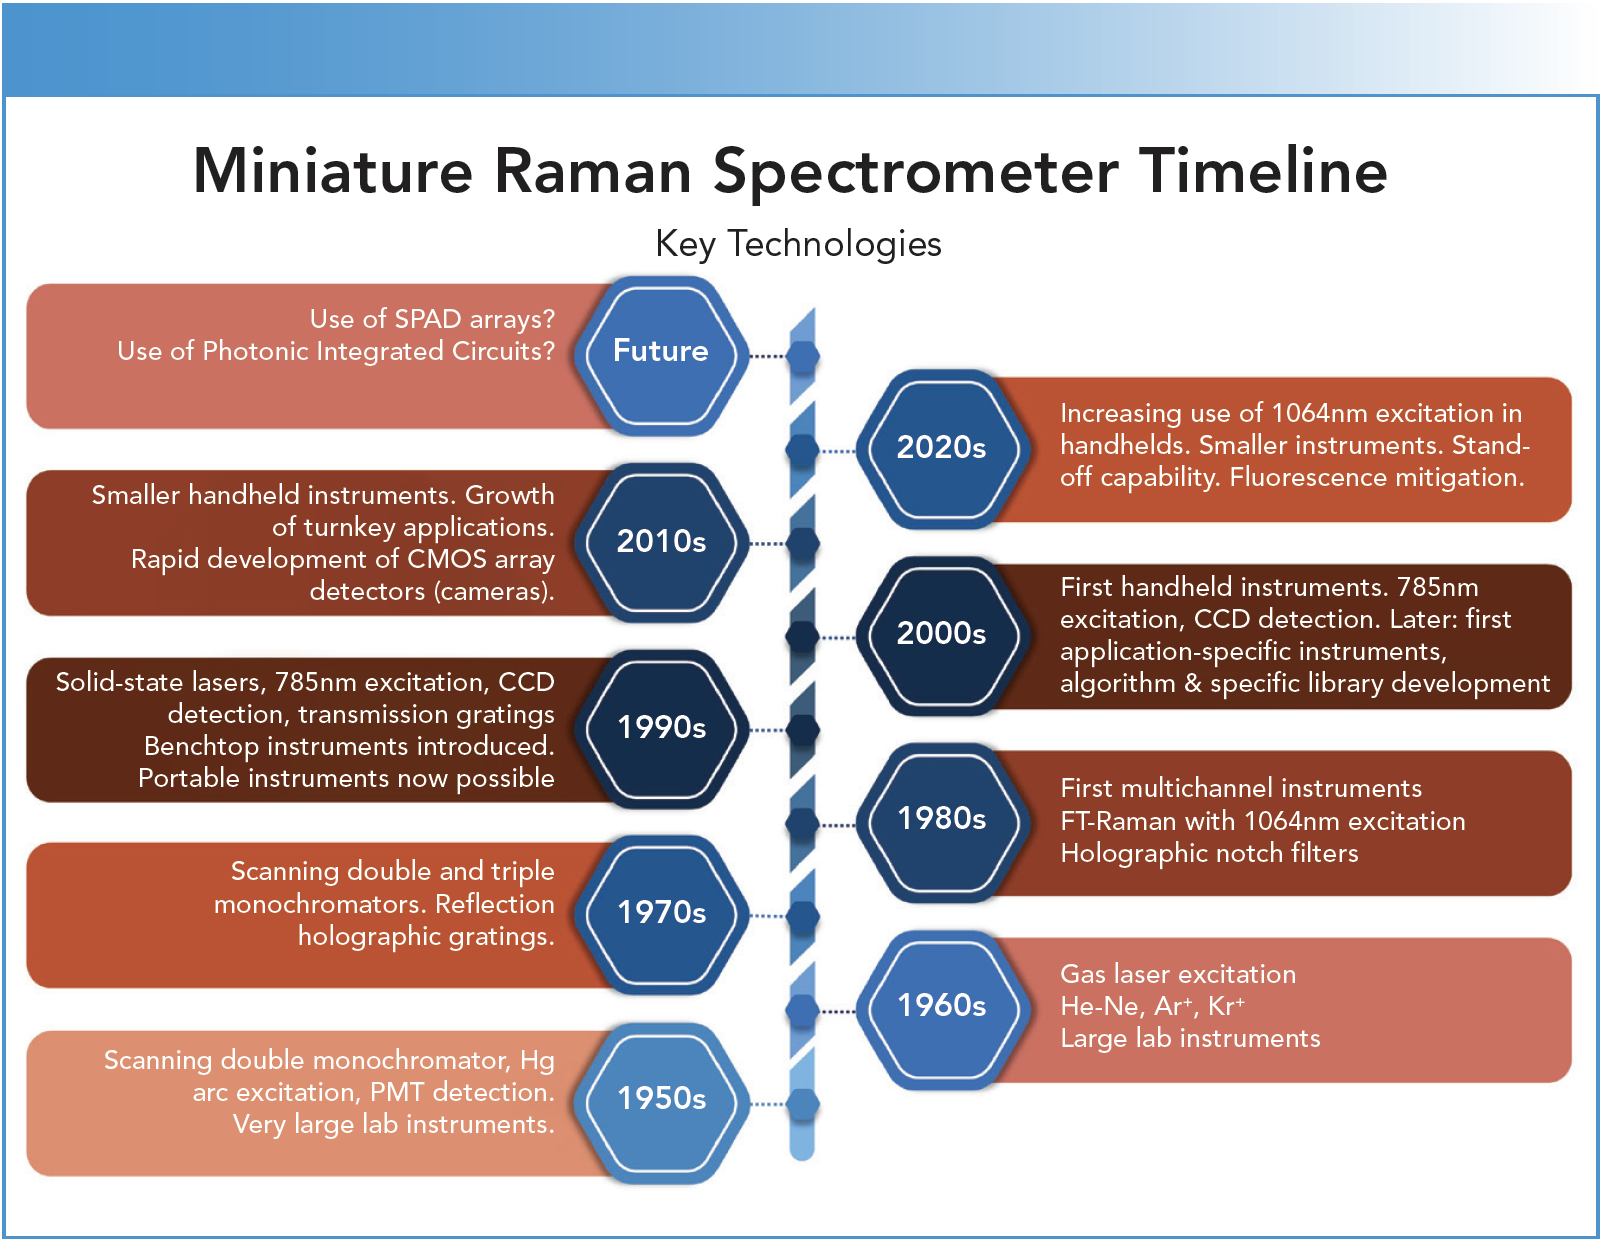 FIGURE 1: The evolution of fully-integrated handheld Raman spectrometers and their key technologies. The 1990s saw the introduction of technologies that make portable Raman instruments possible, with the first fully-integrated handheld 785 nm excitation systems introduced in 2005. Since that time, the instruments have shrunk in size while improving their performance, and several handheld 1064 nm excitation instruments have been introduced.